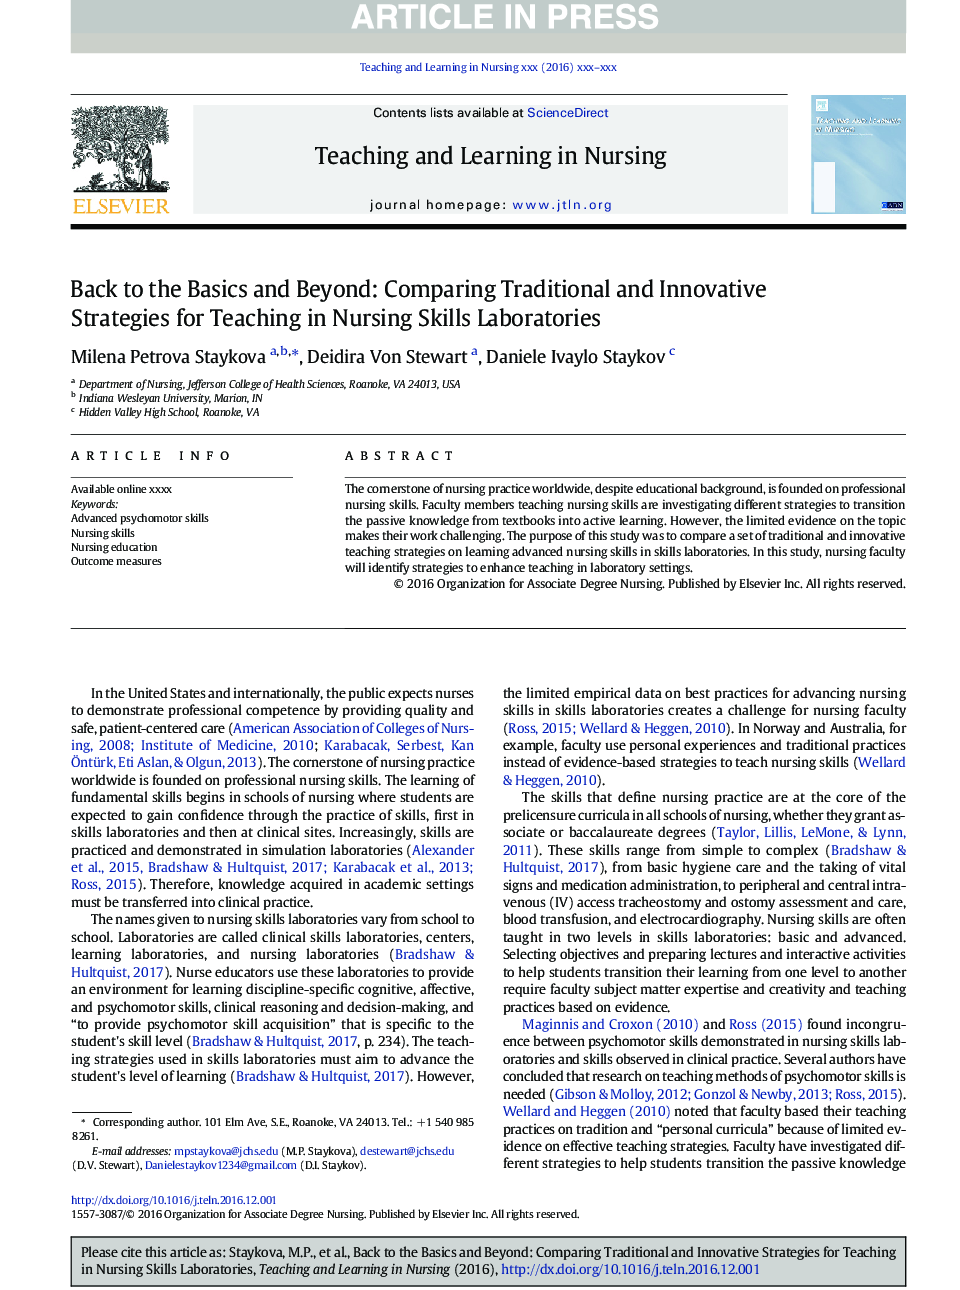 Back to the Basics and Beyond: Comparing Traditional and Innovative Strategies for Teaching in Nursing Skills Laboratories